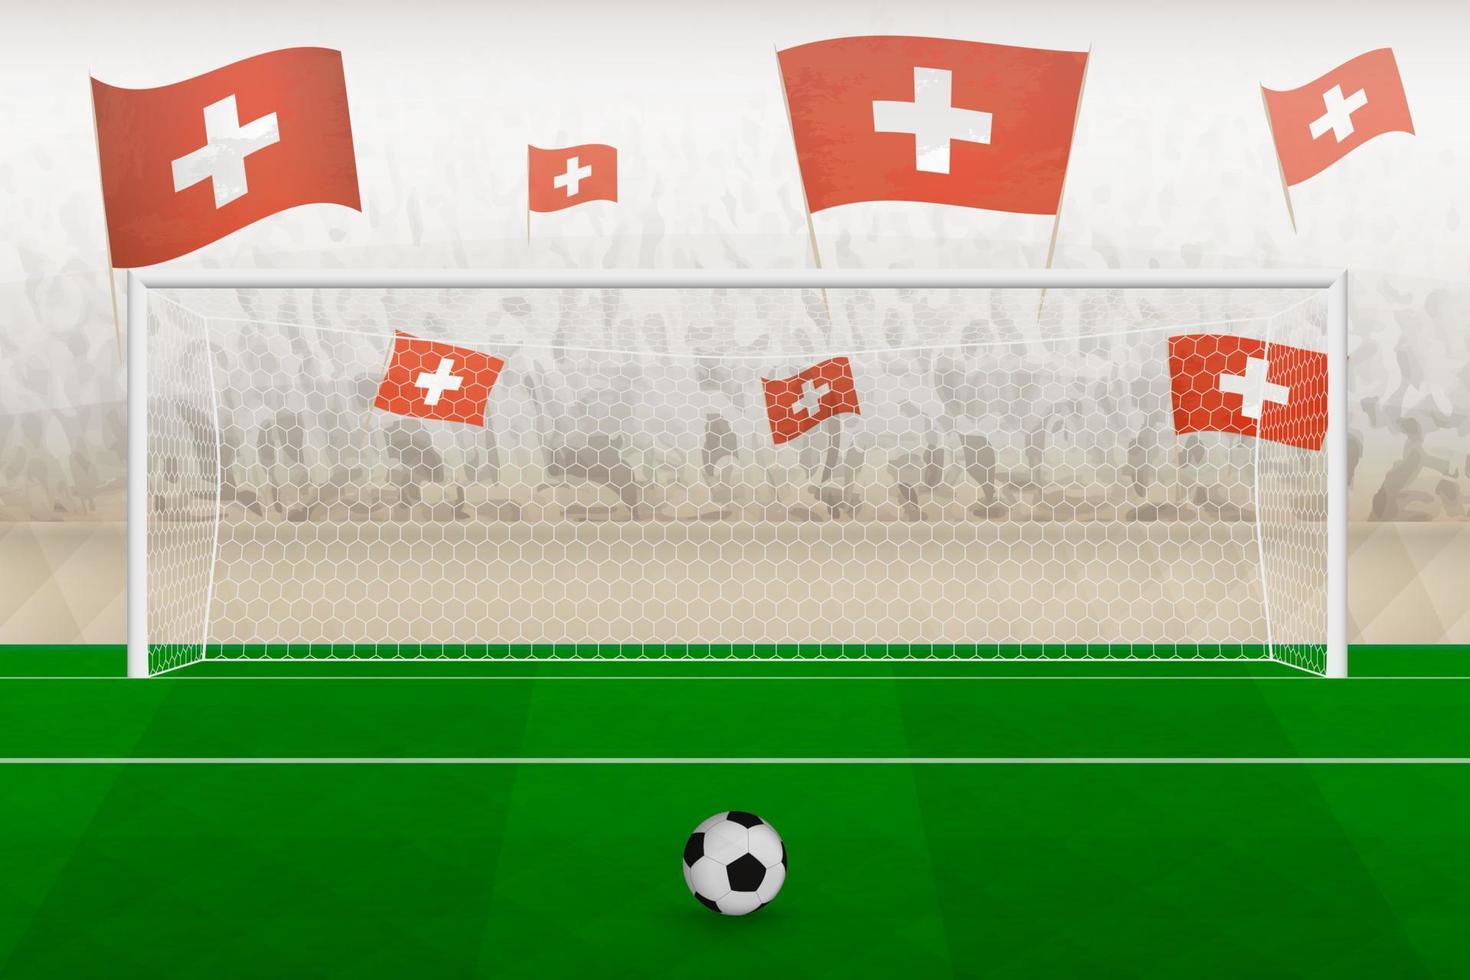 Switzerland football team fans with flags of Switzerland cheering on stadium, penalty kick concept in a soccer match. vector